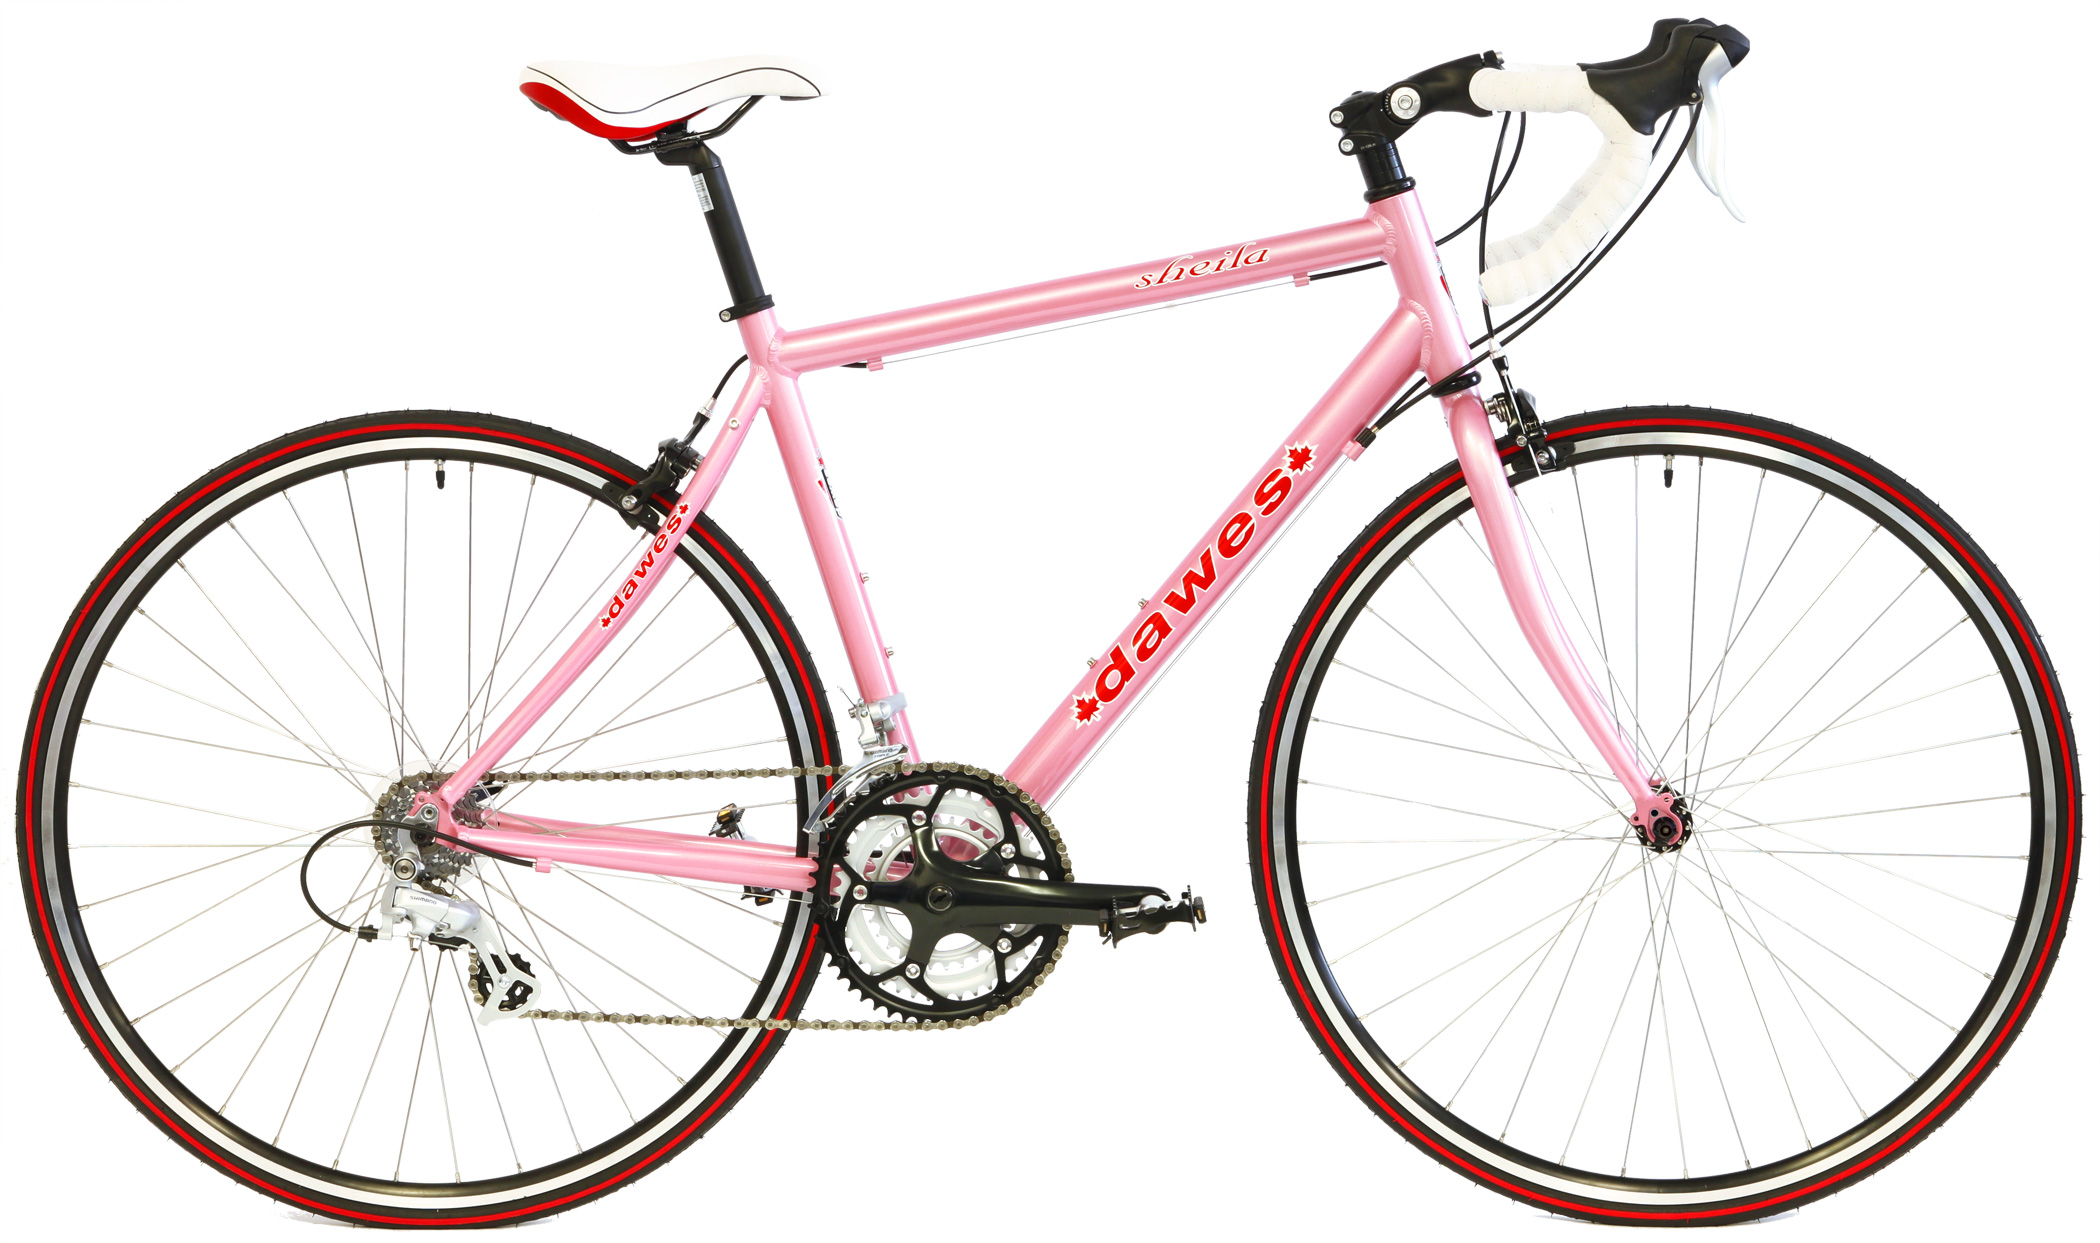 Save Up to 60% Off Womens Road and Fitness Bikes - Dawes Sheila Women Specific Road Bike